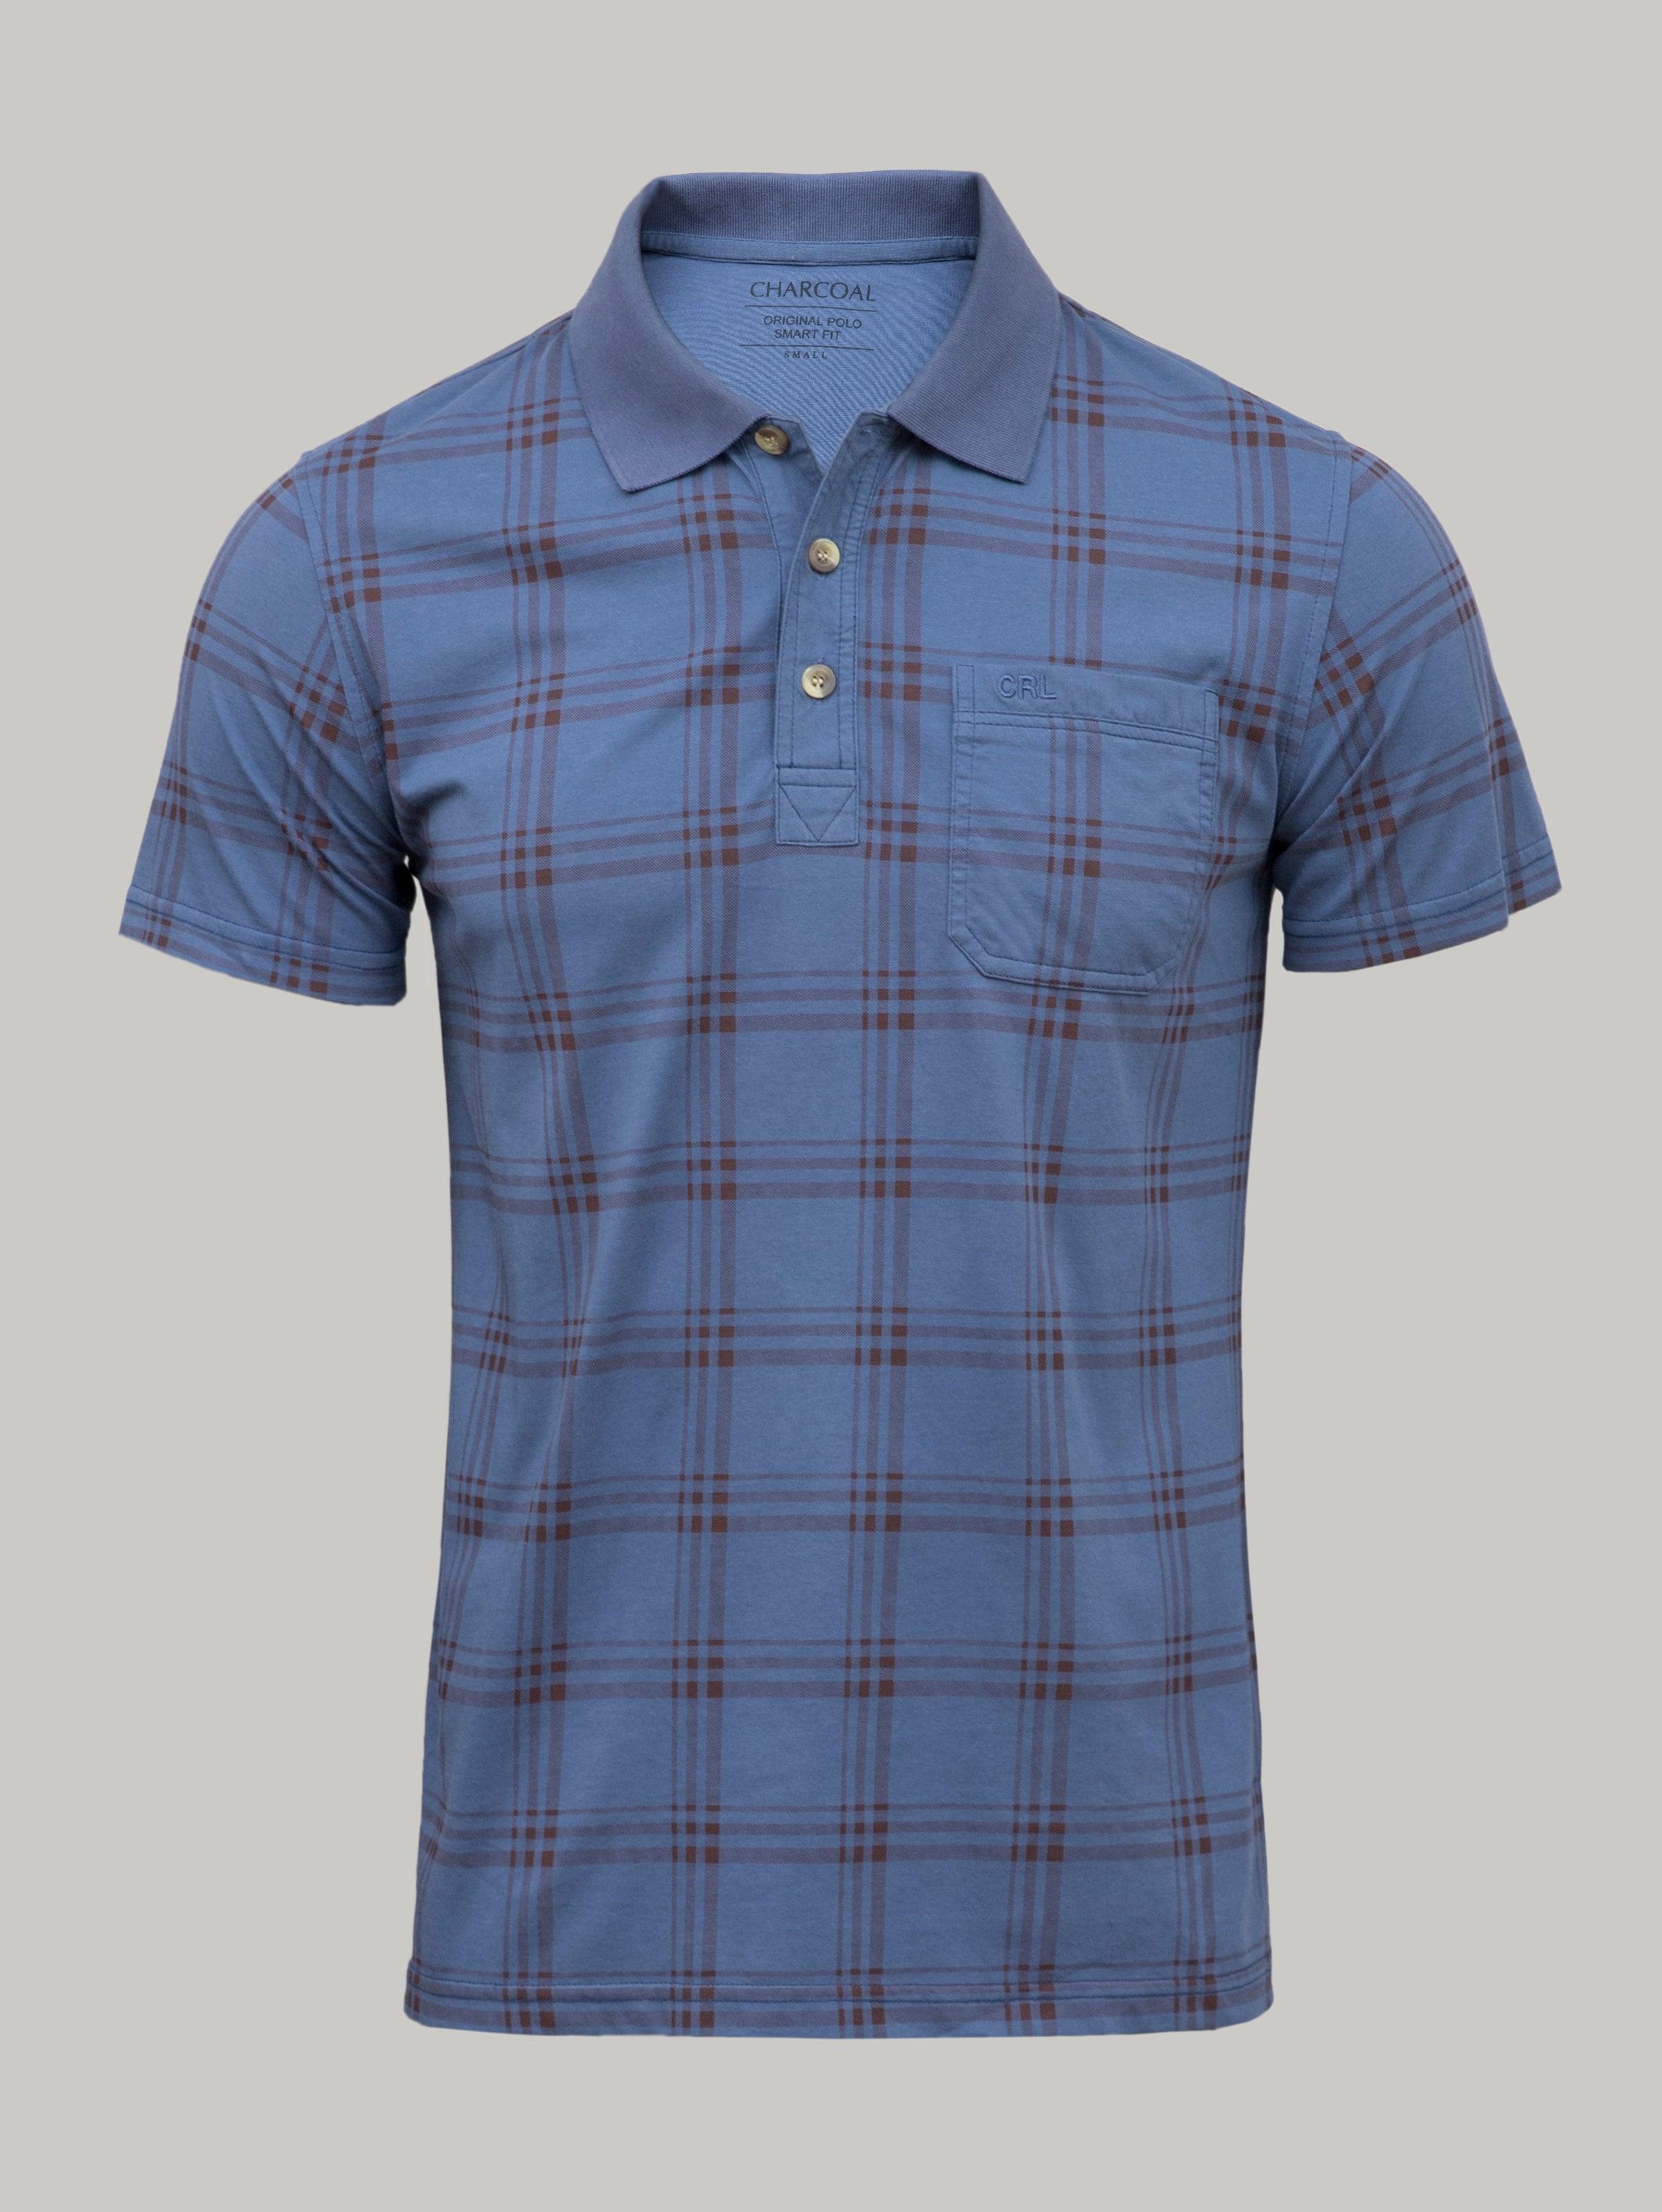 T Shirt Polo Blue at Charcoal Clothing